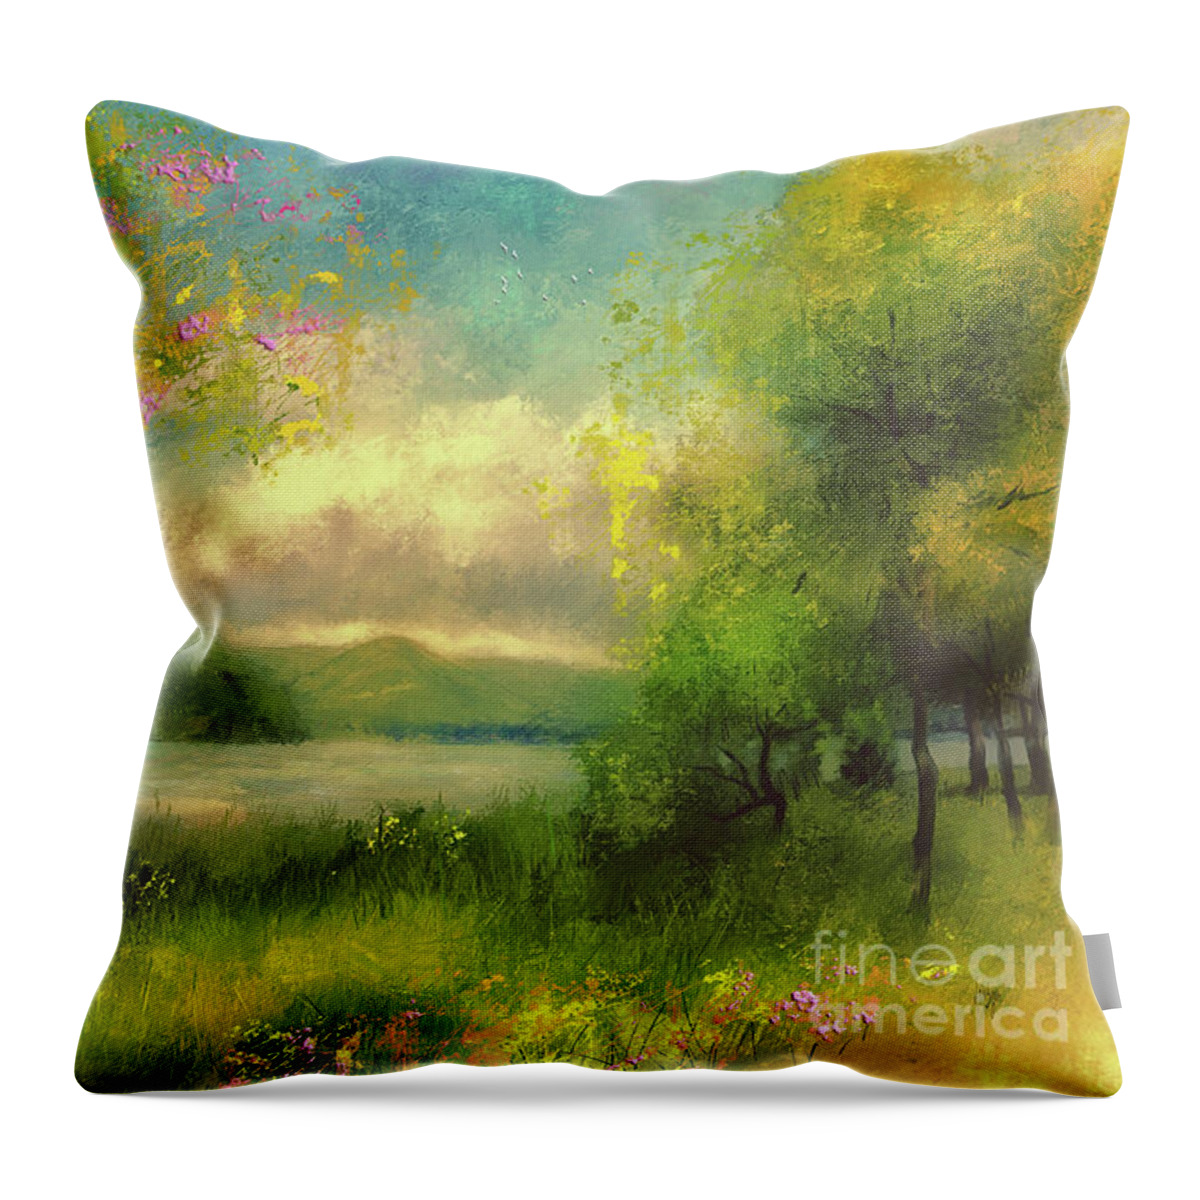 Spring Throw Pillow featuring the digital art A Soft Spring Day by Lois Bryan